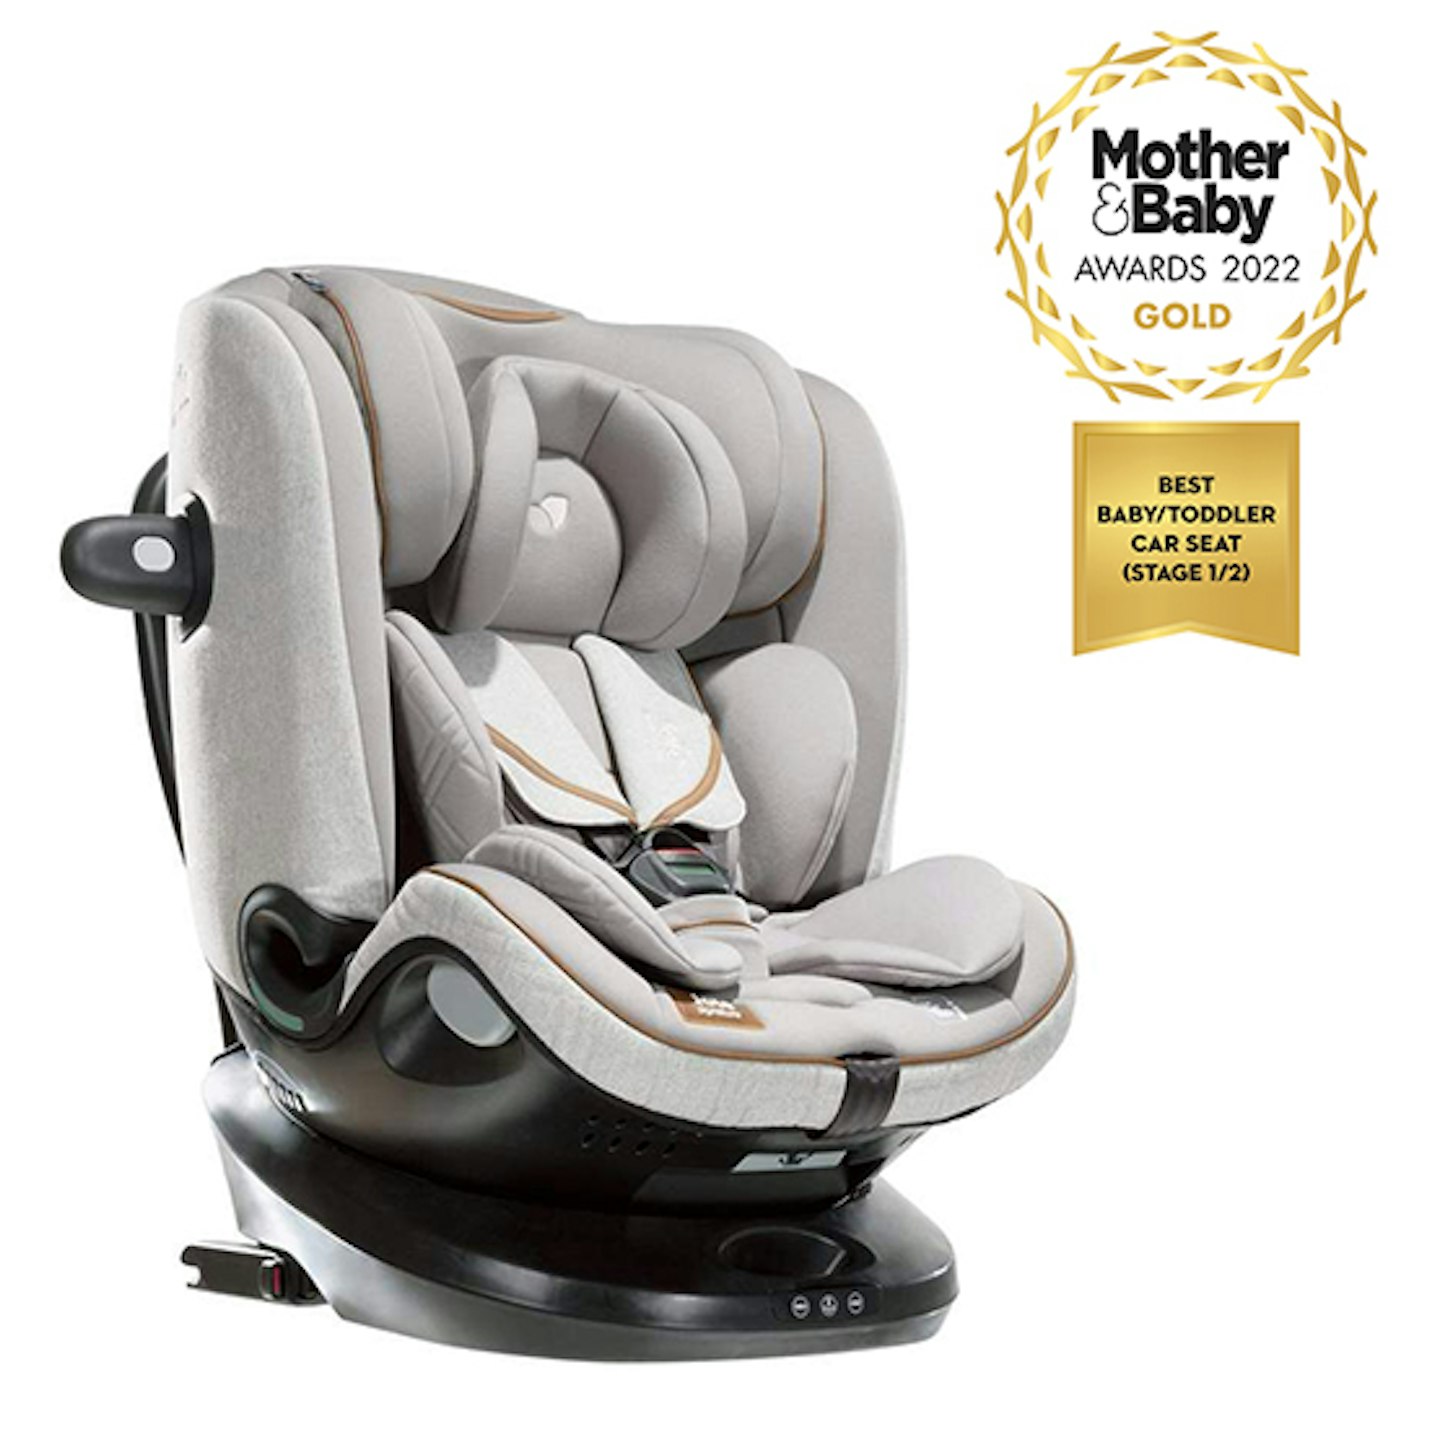 Joie i-Spin Safe car seat review - Car seats from birth - Car Seats